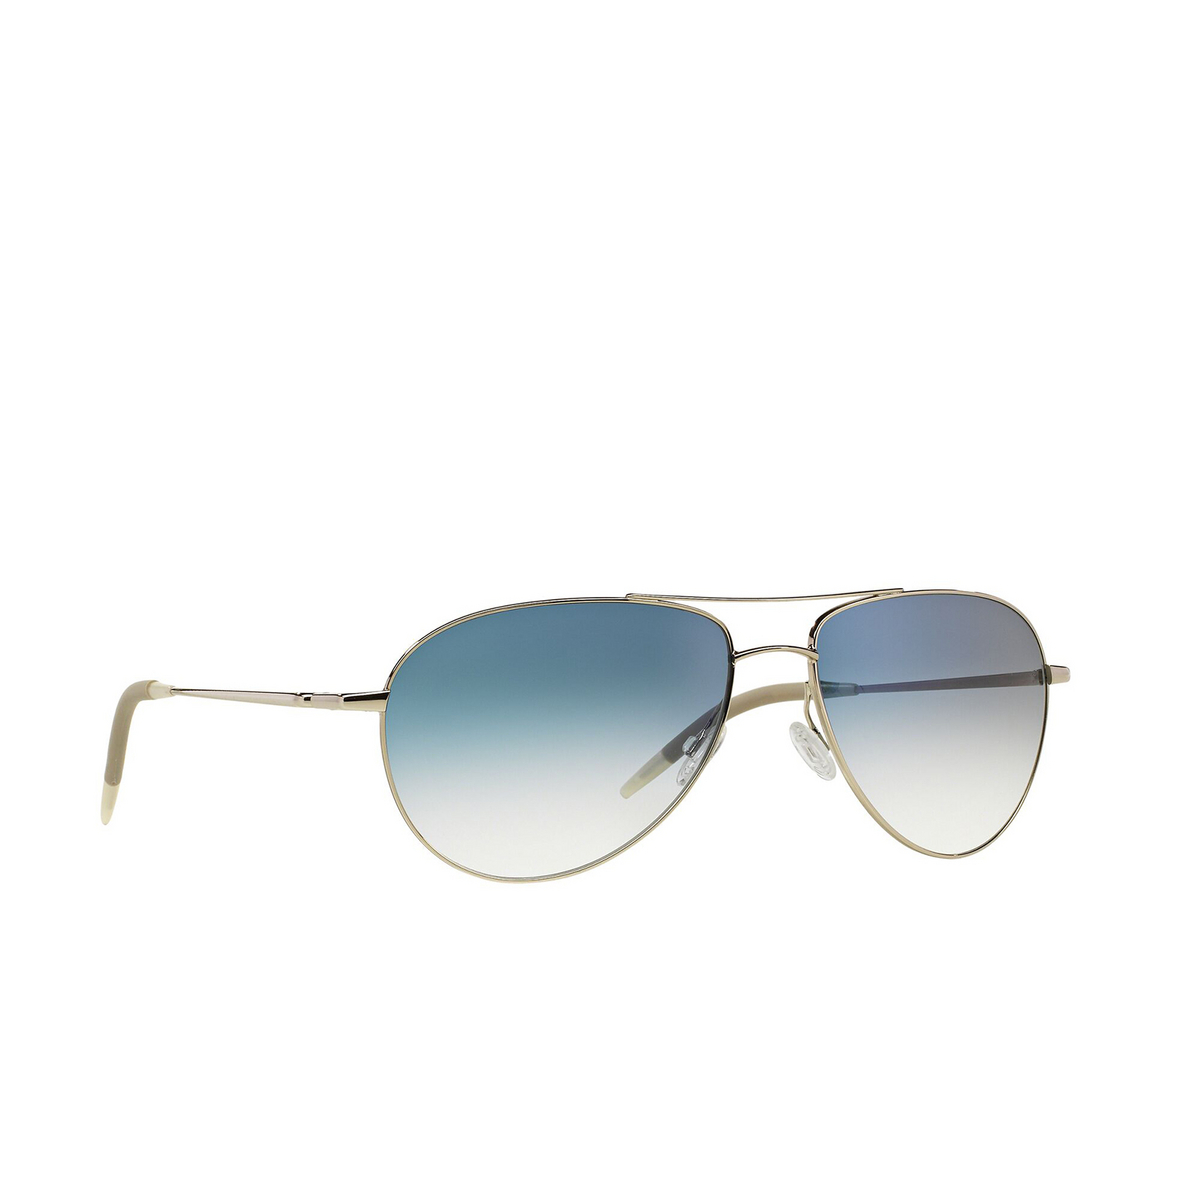 Oliver Peoples® Aviator Sunglasses: Benedict OV1002S color Silver 52413F - three-quarters view.